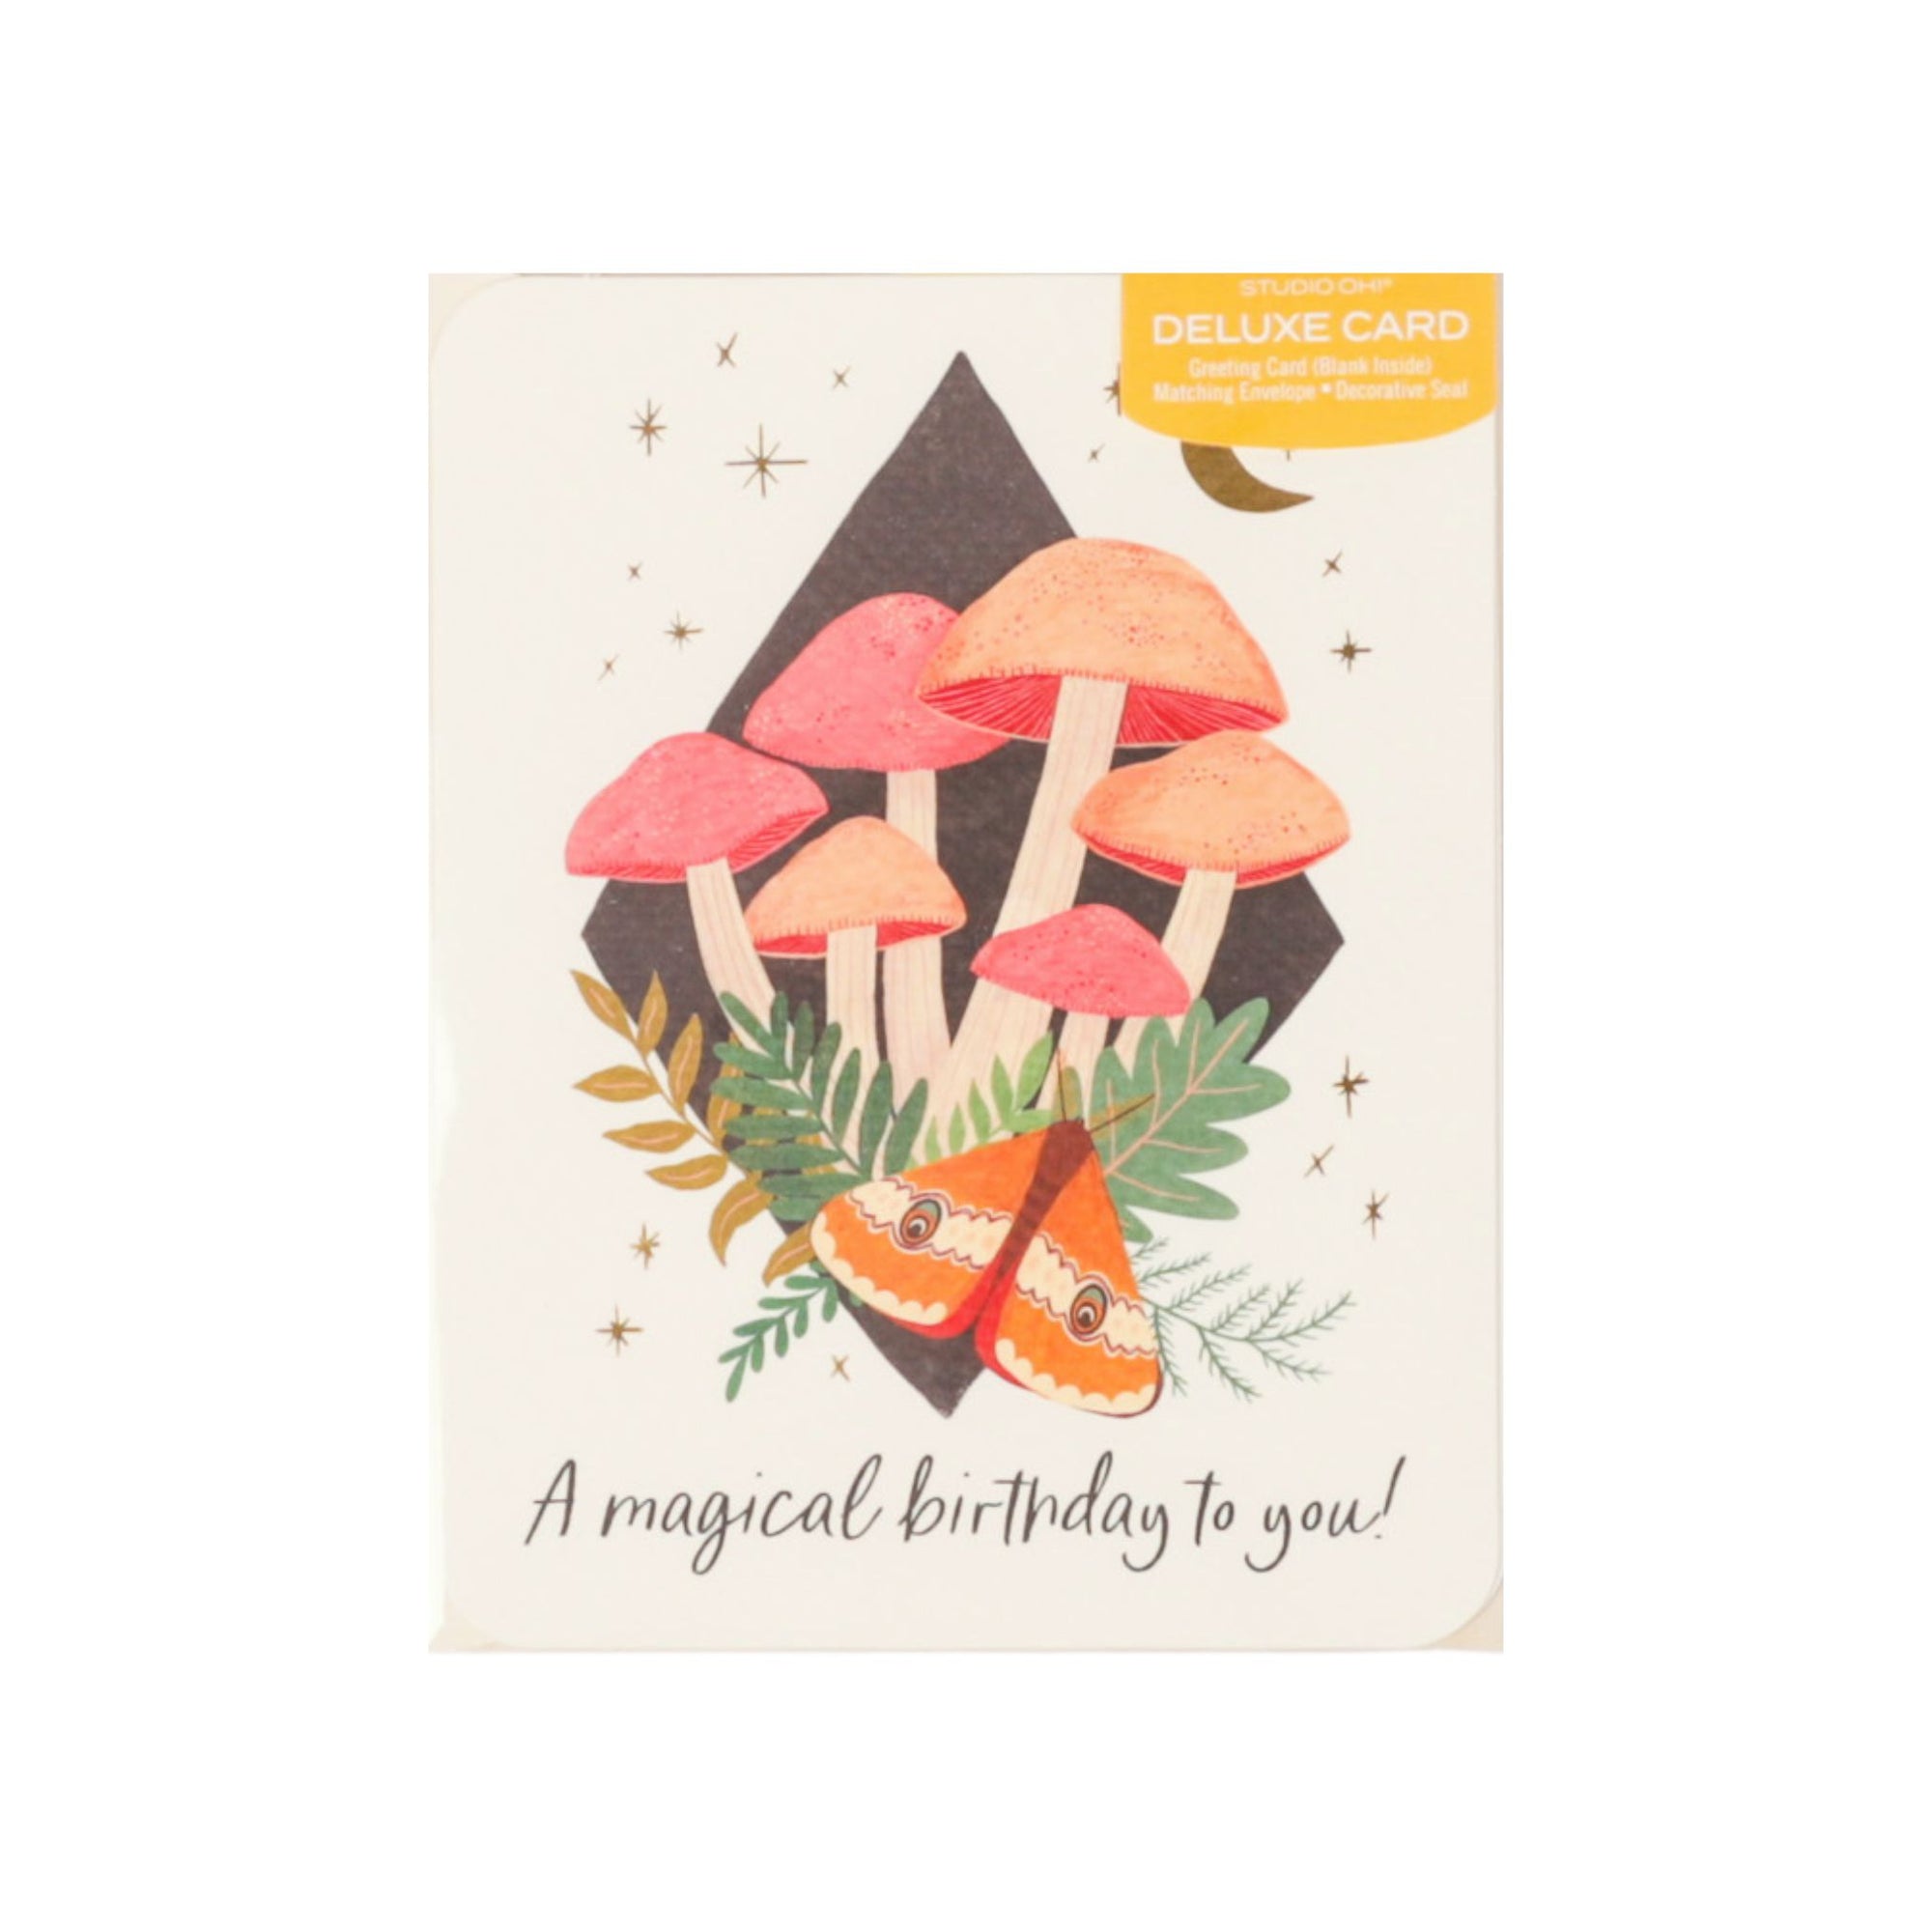 Deluxe Magical Birthday Card - Green Fresh Florals + Plants